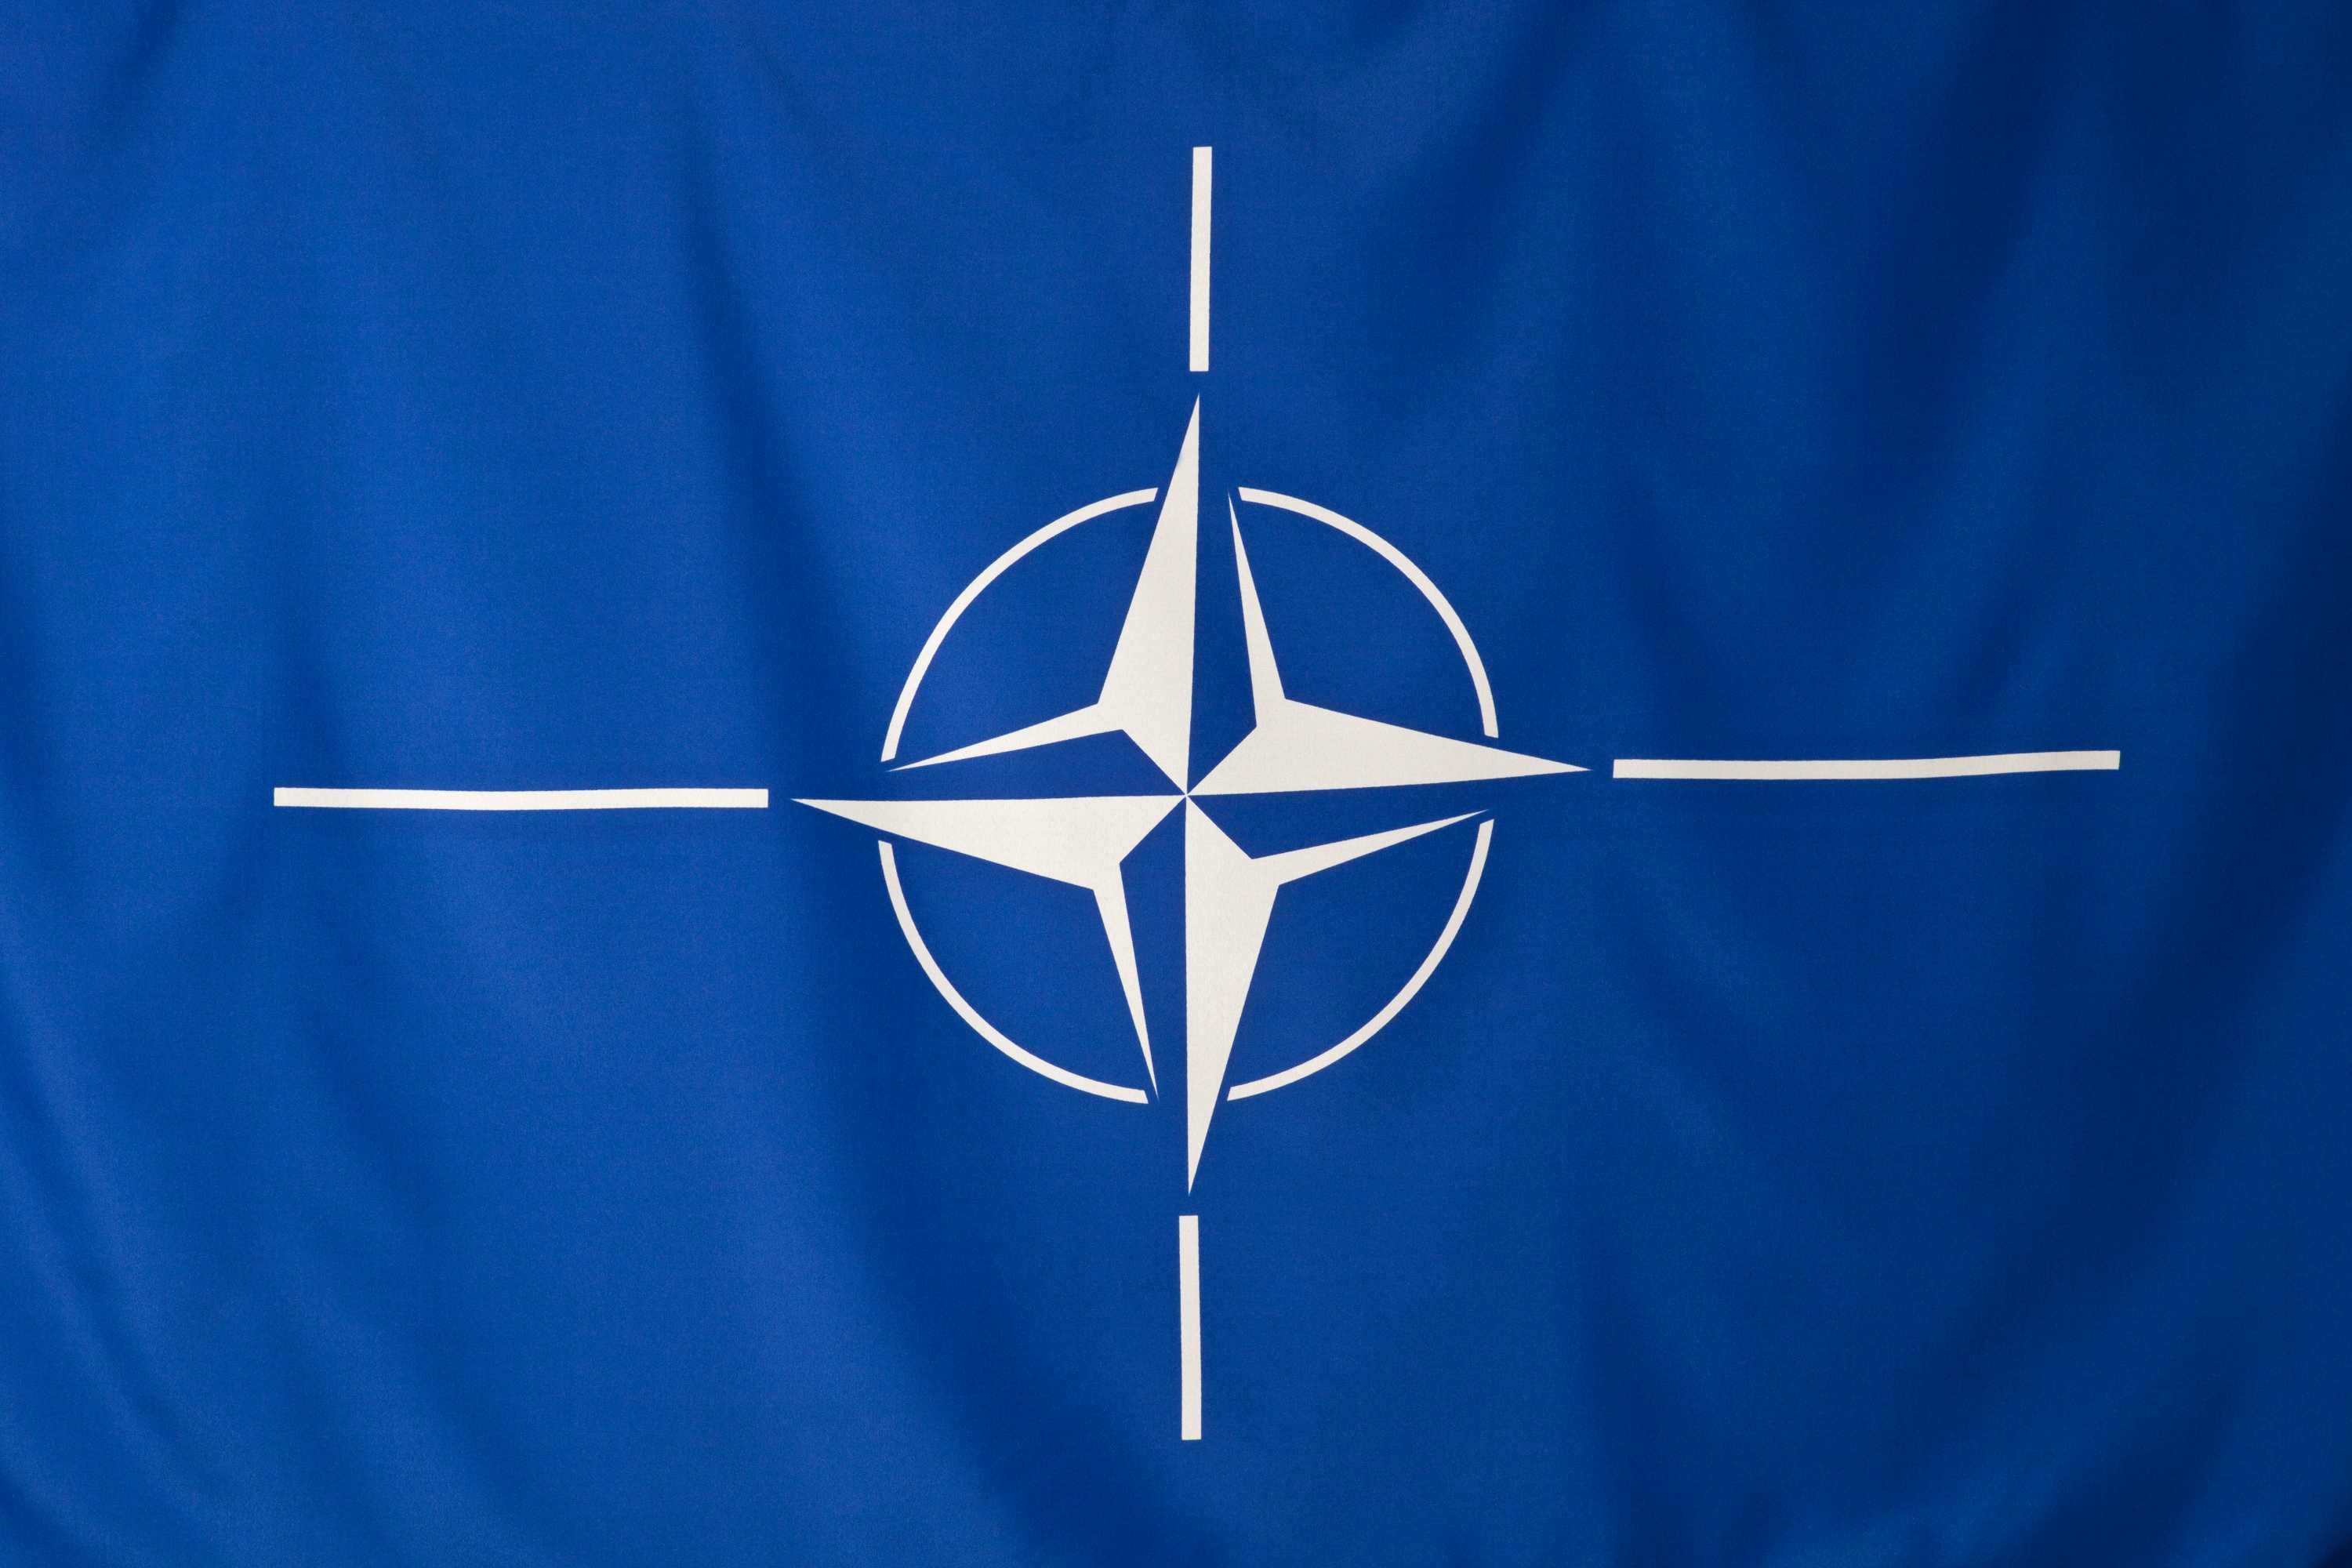 NATO’s nadir and how best to move forward